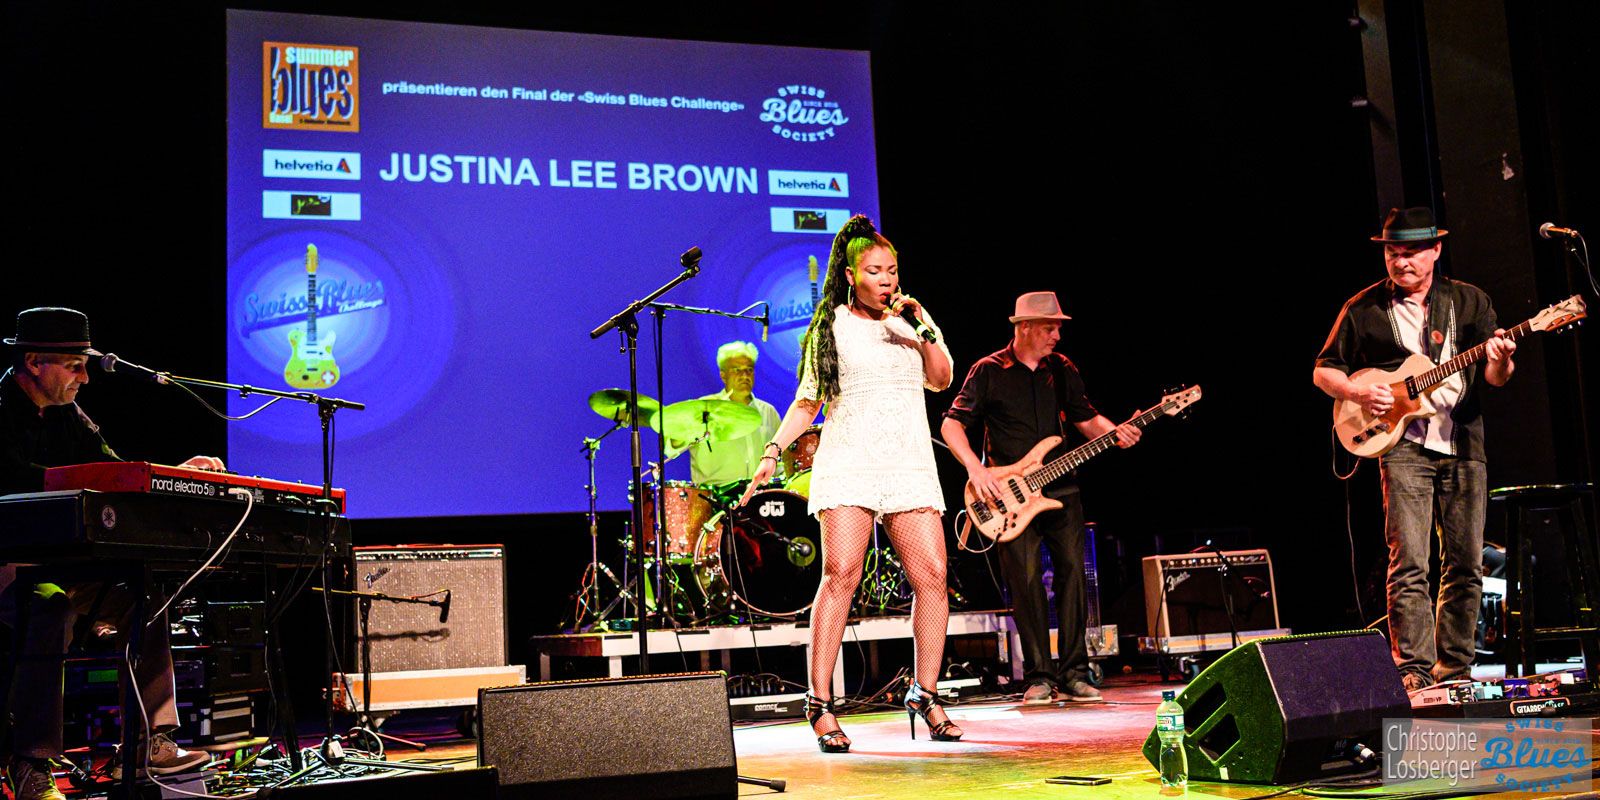 Justina Lee Brown gagne le Swiss Blues Challenge 2019!